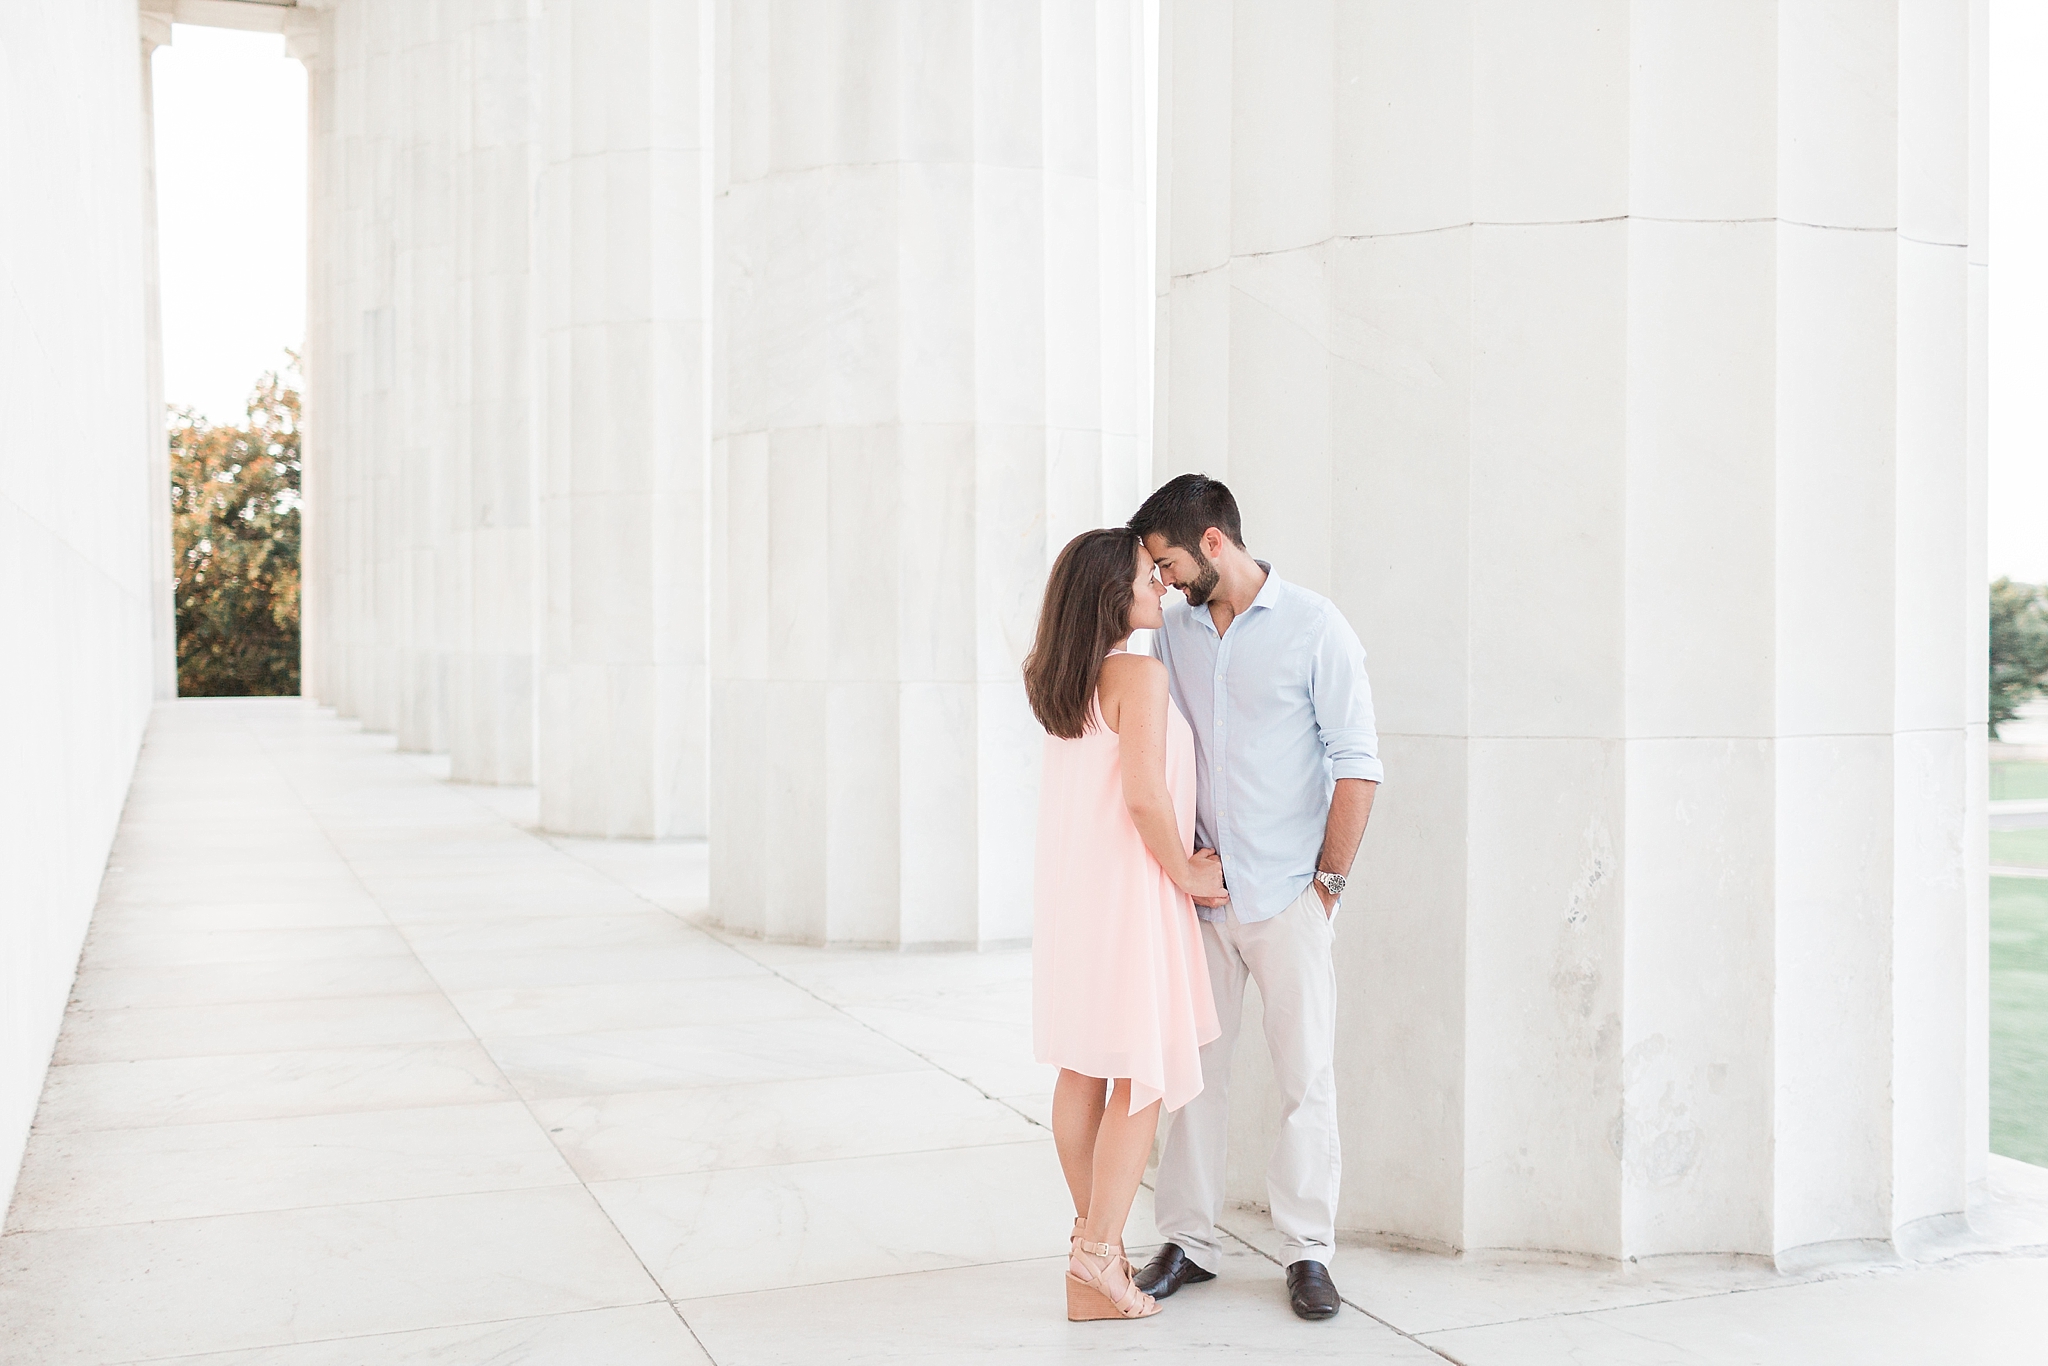 Choosing an engagement session location isn't always easy, so this Washington, DC wedding photographer shares a few tips on how to select the perfect spot!